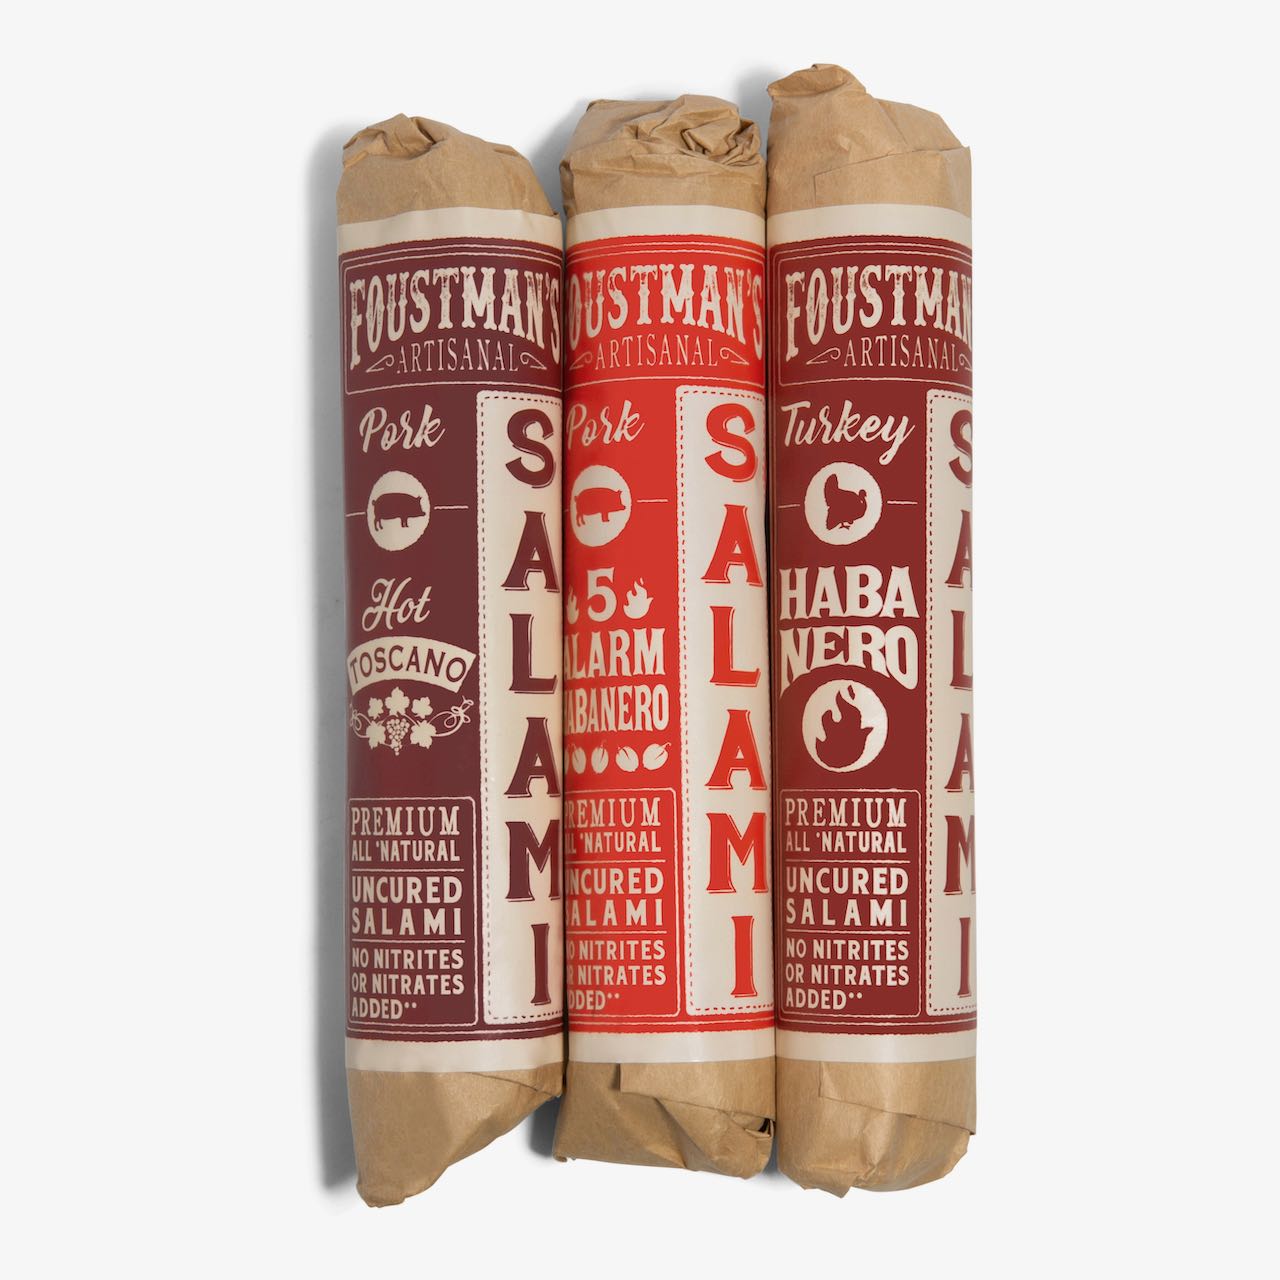 SALAMI SPICY TRIO (Variety 3-Pack) HOT | ALL-NATURAL UNCURED SALAMI